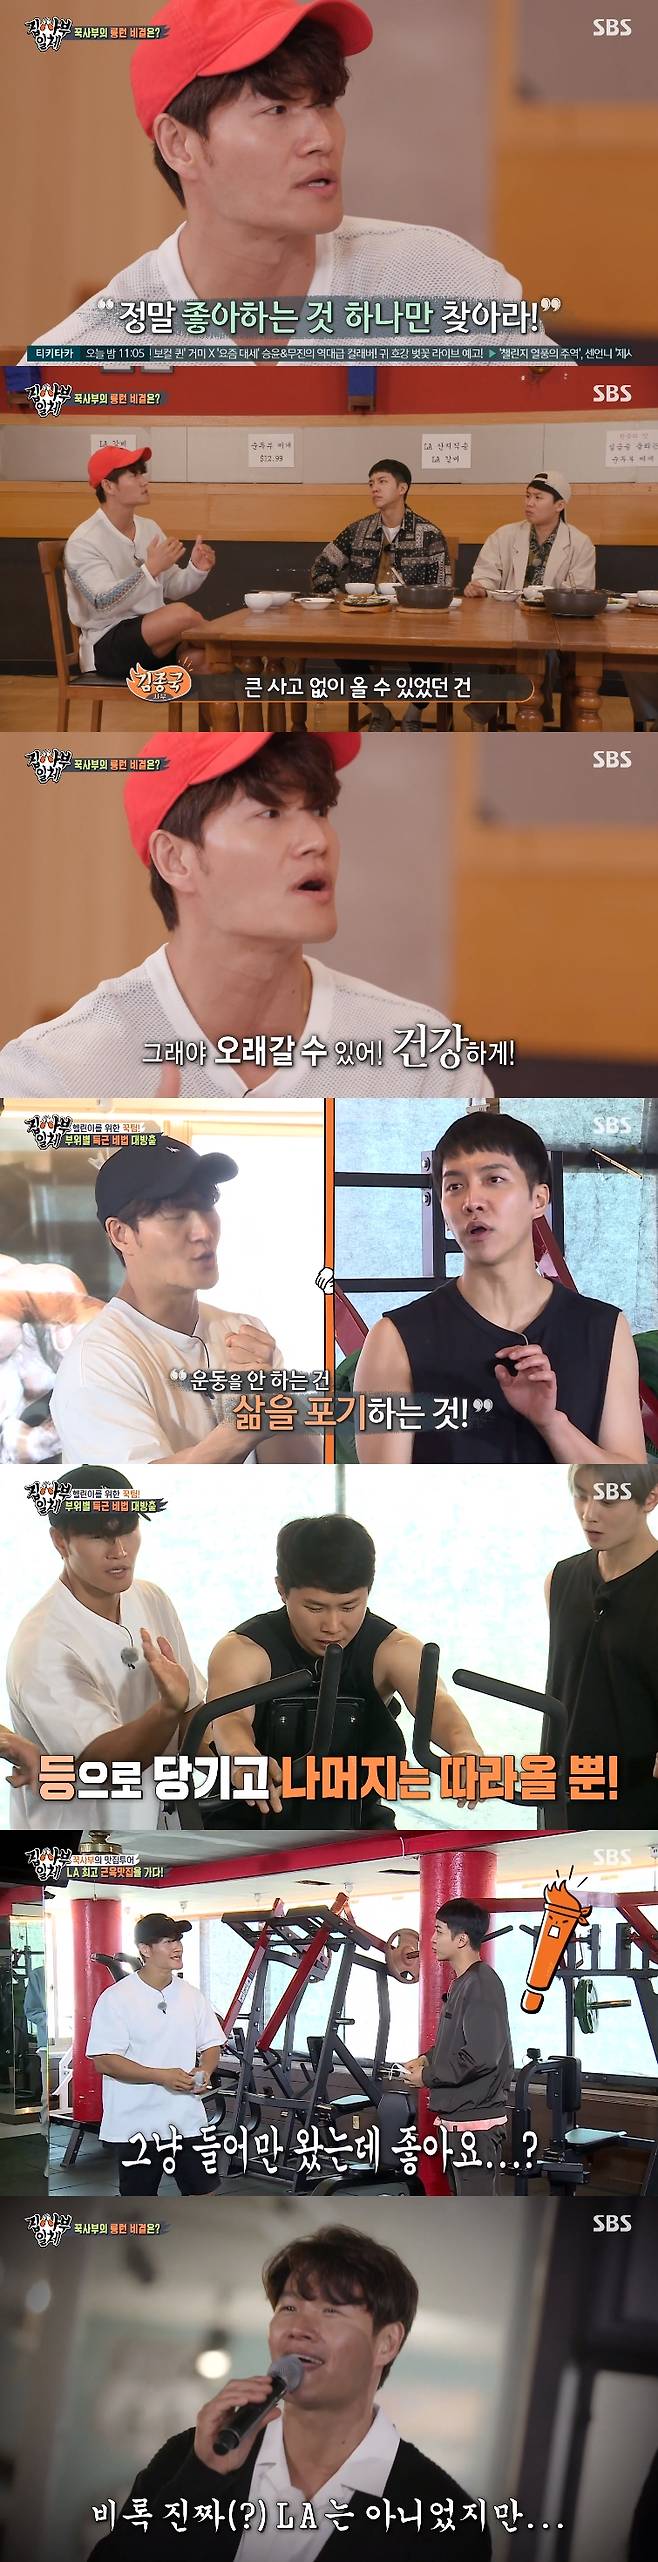 All The Butlers singer Kim Jong-kook reveals why shes soaked in ExerciseKim Jong-kook was the master of the SBS entertainment program All The Butlers broadcast on the 25th.Kim Jong-kook and Kim Dong-Hyun stepped out on the bridge fight Battle; at the beginning they seemed tense, but they were increasingly leaning toward Kim Jong-kook.Kim Dong-Hyun, who couldnt hold on, eventually declared his surrender, shouting Wait! Lee Seung-gi said, Ill do my fitness.Health is the best, Yang said, laughing as he responded, (Kim Dong-Hyun) is nothing.All the Butlers members and Kim Jong-kooks fitness battle were unfolded.First, Kim Jong-kook and Cha Eun-woos short-range running Battle began lightly, and Kim Jong-kook showed off his extraordinary leg muscles from the bodys shake, making the crowd nervous.The result was Cha Eun-woos win. All The Butlers members, who expected the loss, enjoyed the joy of victory. Lee Seung-gi admired it, saying it was like Usain Bolt.Kim Dong-Hyun, who saw this, showed confidence, and the two Battles were again concluded.Kim Dong-Hyun ran tight with Kim Jong-kook before falling ahead of the finish line, raising tension.The result was a victory for Kim Jong-kook, with a half-foot difference from the video reading.A short time later, an unidentified Jokgu team appeared to suggest Jokgu Battle; Kim Jong-kook and All The Butlers teamed up and showed confidence.When the game was over midway, Jokgu surprised everyone by noticing that it was included in the national team.After a difficult battle, they were trained by Kim Jong-kook to a gym.Kim Jong-kook also helped with training with professional Exercise knowledge, like a real trainer.Kim Jong-kook ended Exercise and left a Kim Jong-kook statement saying, Exercise is life; it should be one.After finishing Exercise, they all filled the ship with Korean food, and Kim Jong-kook revealed why he was forced to fall into Exercise.Its good to find one thing you really like, not work, so it doesnt have to be multiple, so you can balance while working and last healthy.I have been able to come without a big accident for a long time in the entertainment industry because I did Exercise. Meanwhile, All The Butlers is broadcast every Sunday at 6:25 pm.photoSBS broadcast screen